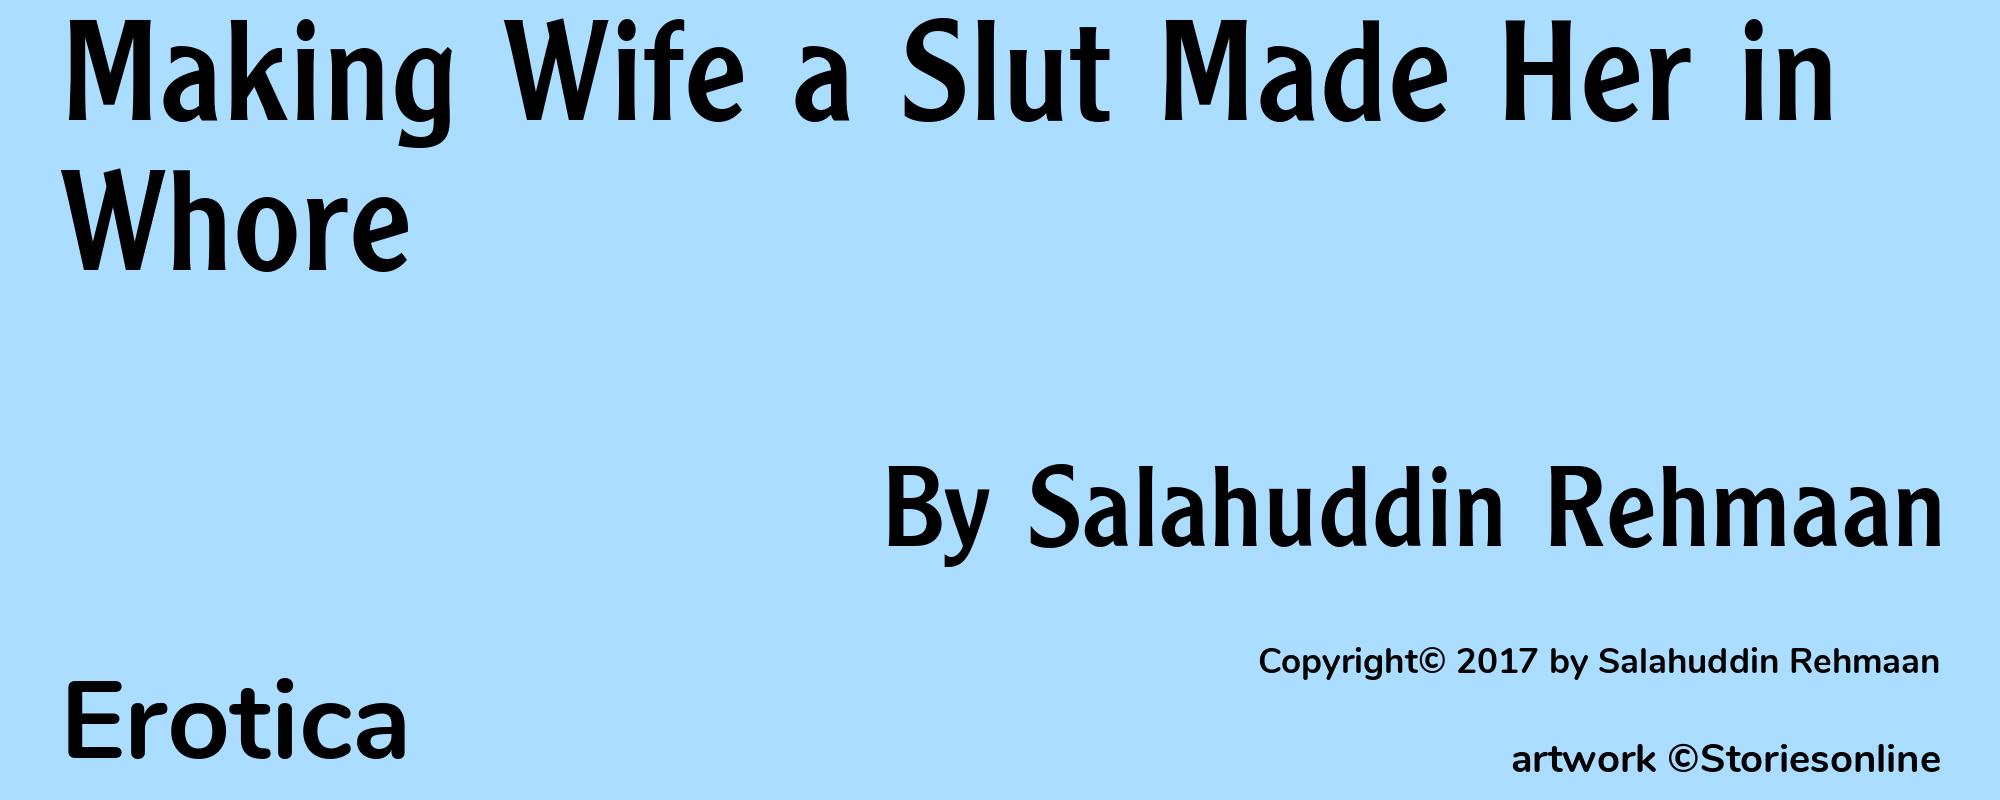 Making Wife a Slut Made Her in Whore - Cover